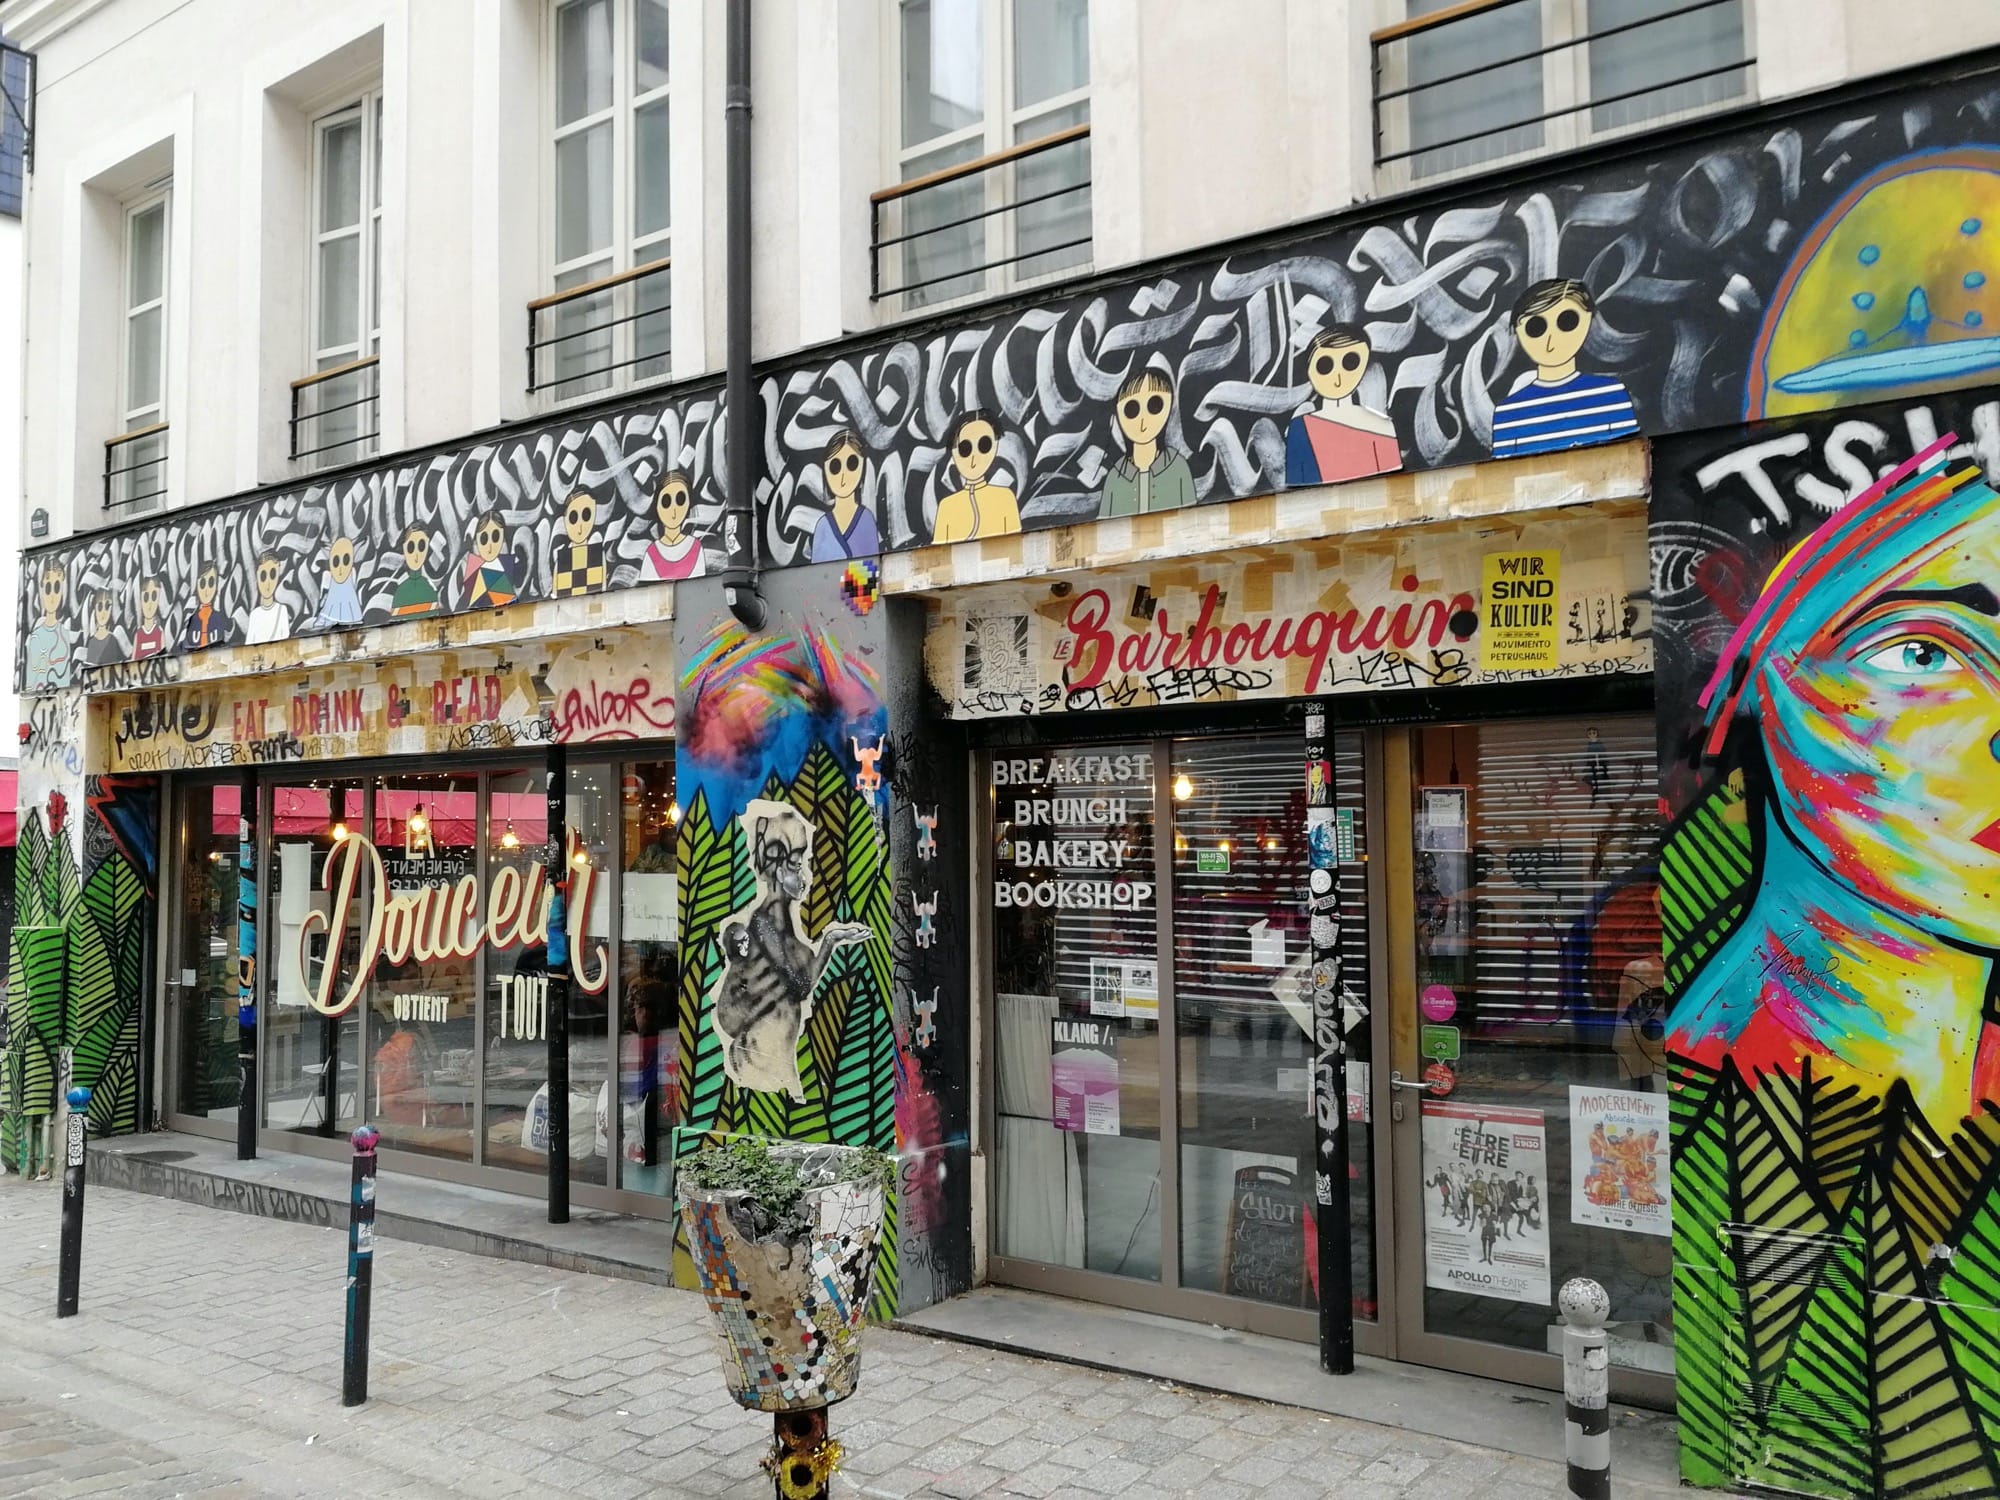 Graffiti 612  captured by Rabot in Paris France